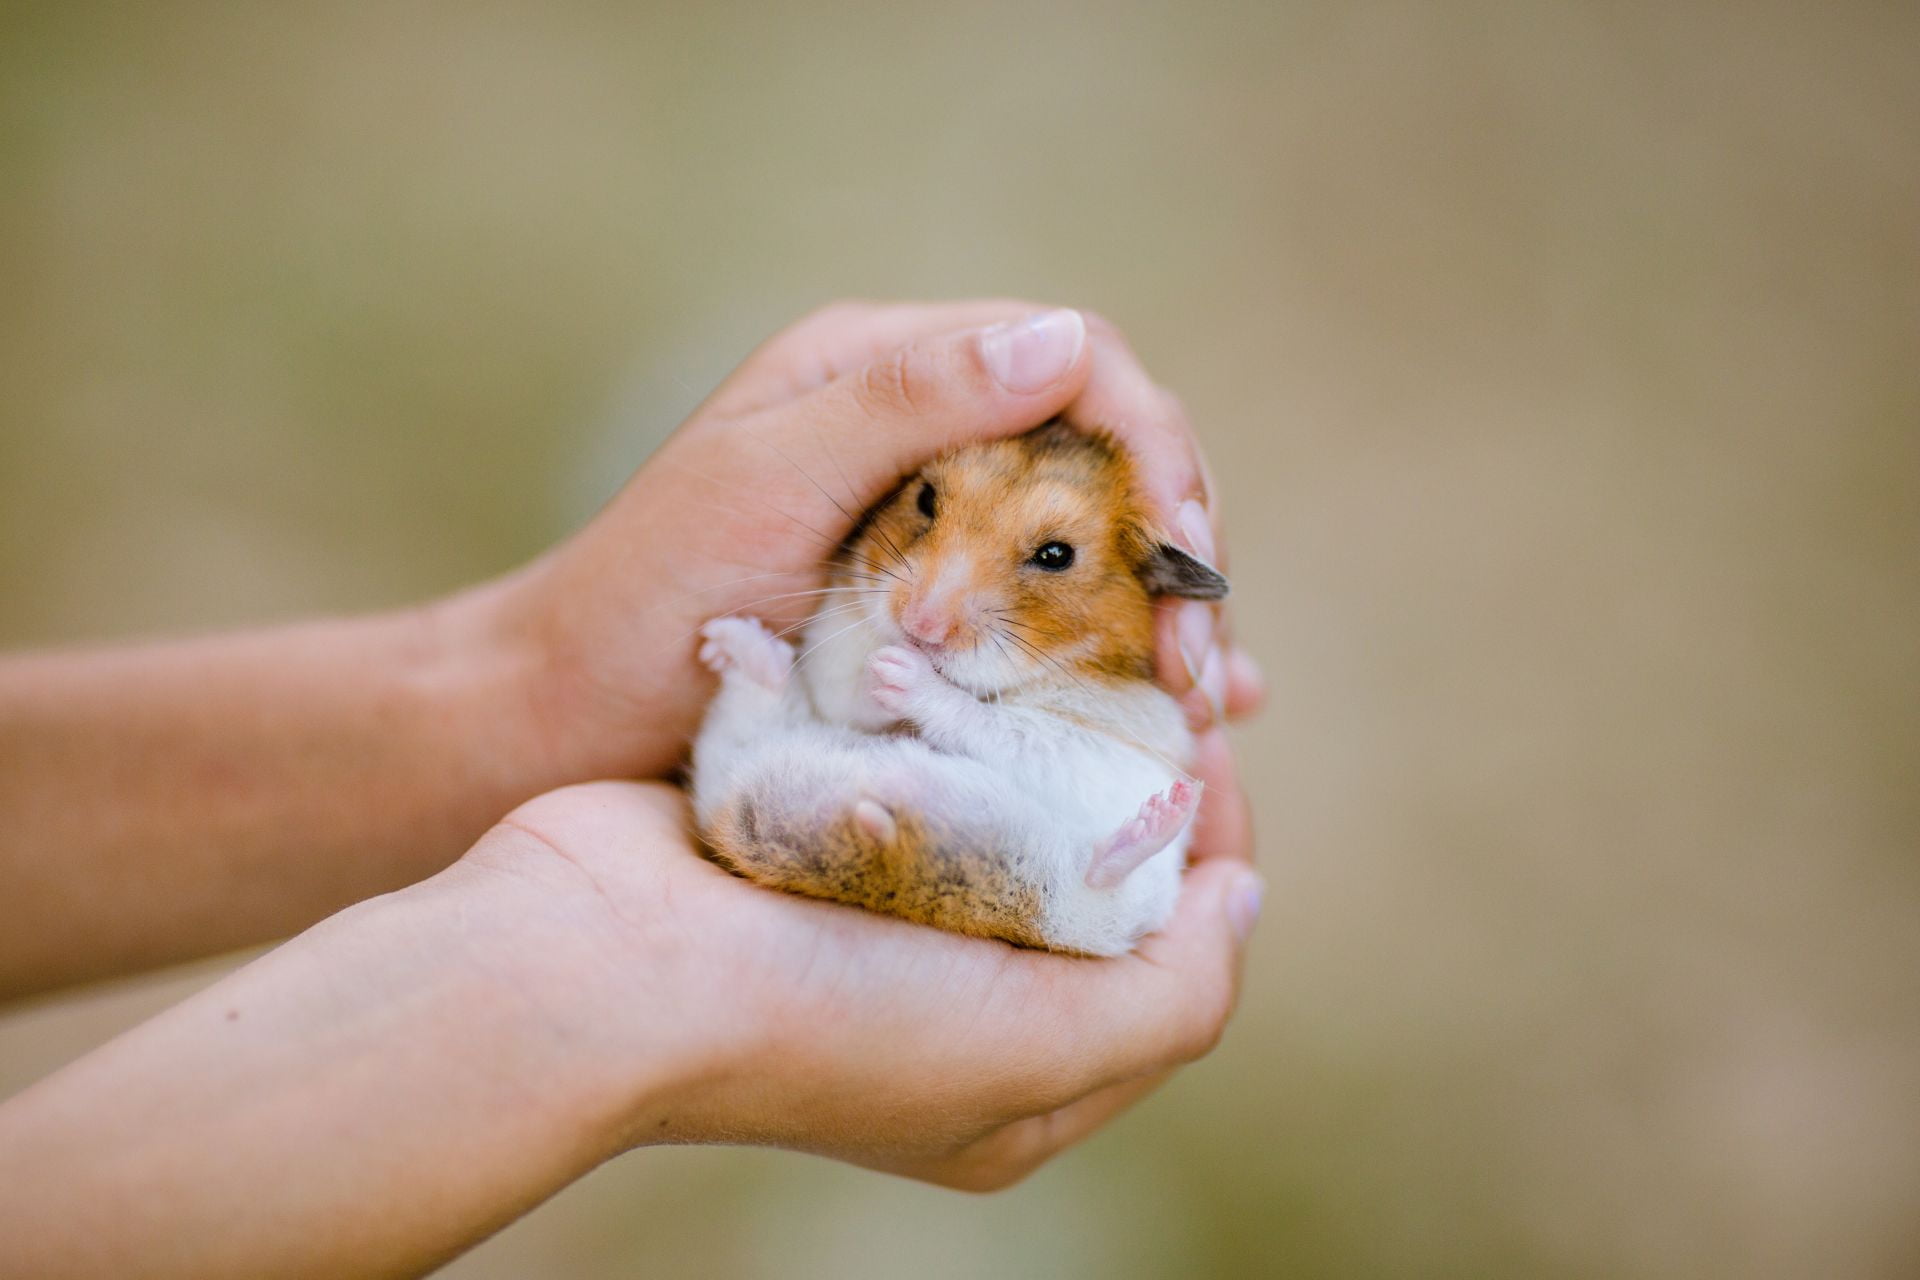 The Most Important Basics of Caring for a Hamster